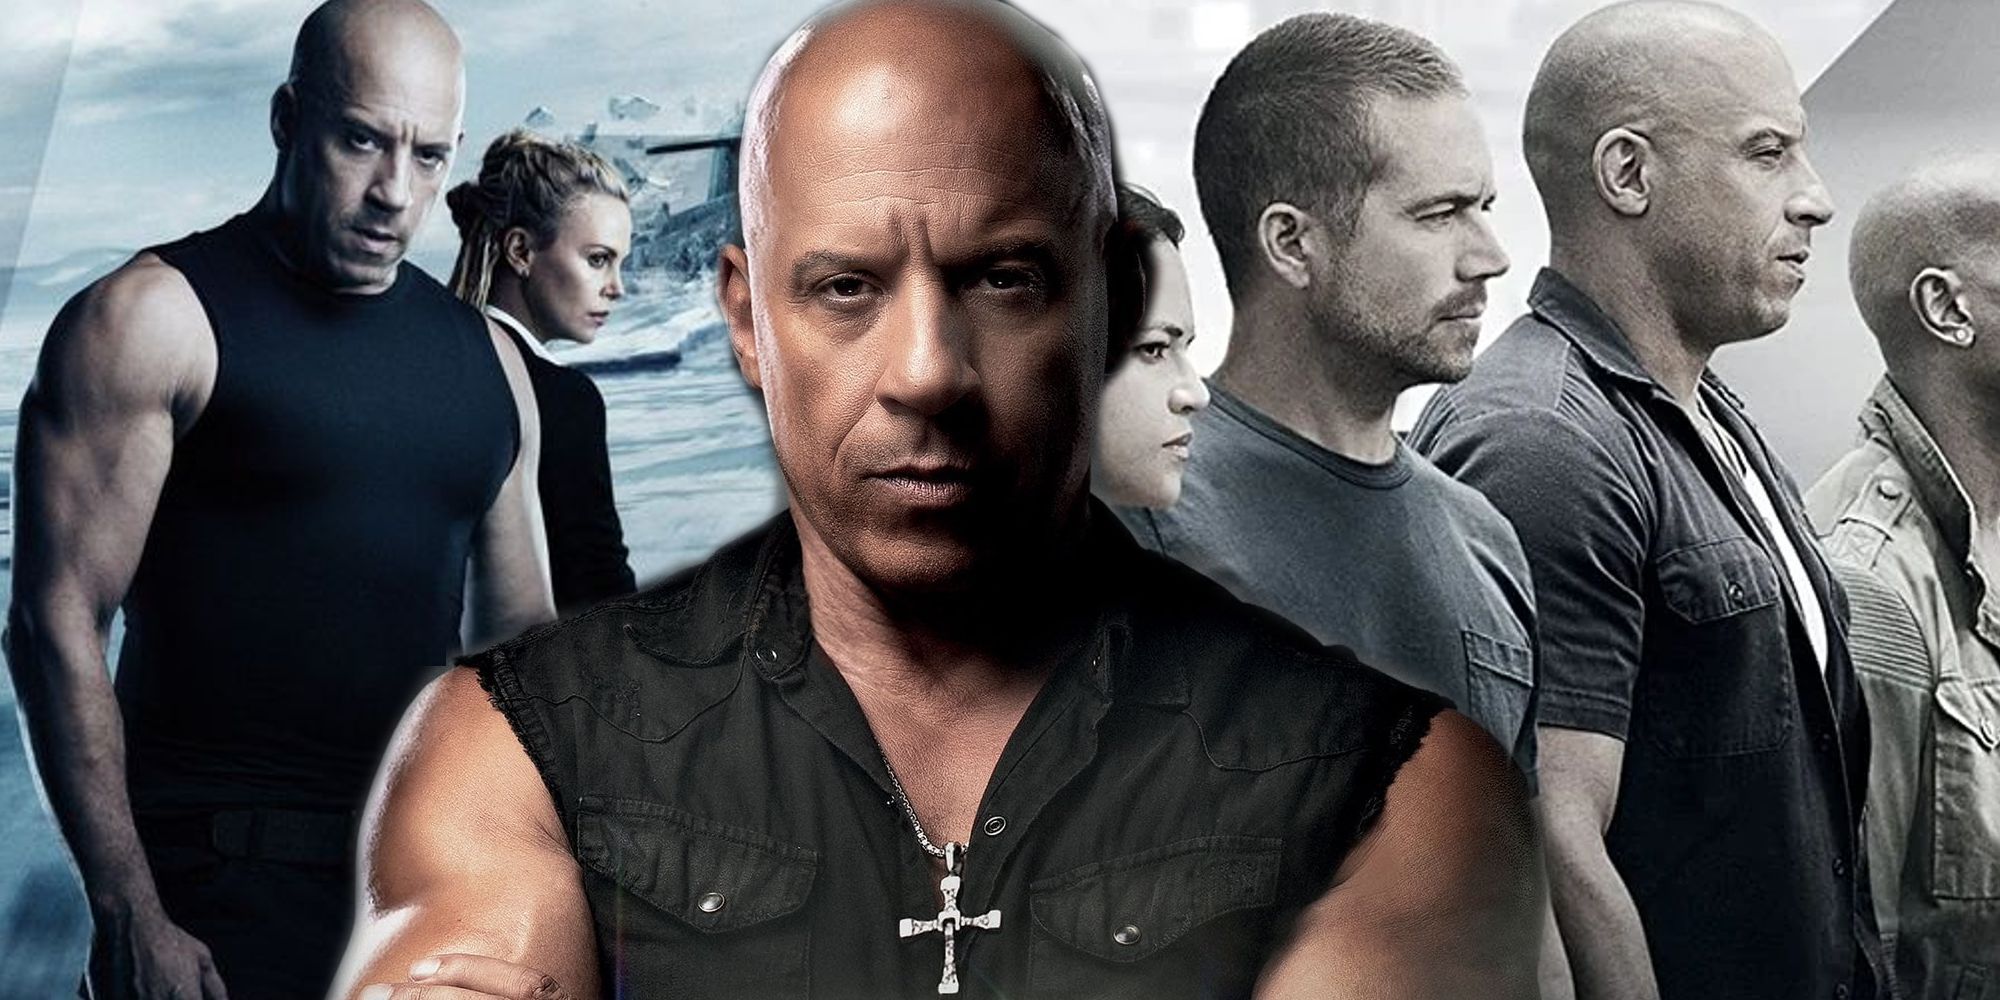 Custom image of Vin Diesel's Dom Toretto against the Fate of the Furious and Furious 7 posters